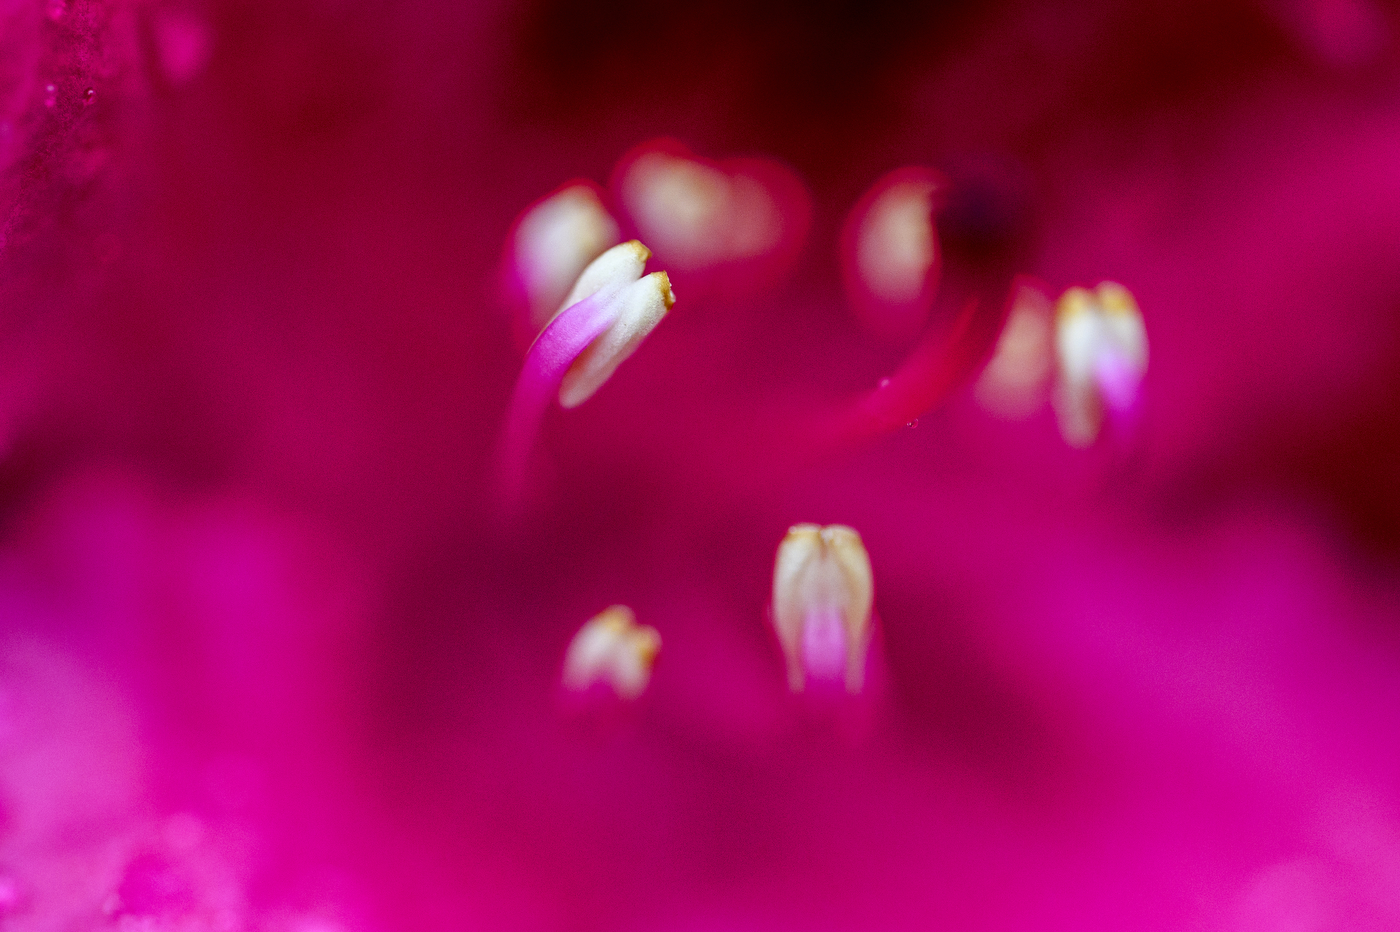 A zoomed-in image of a vibrant, pink flower.